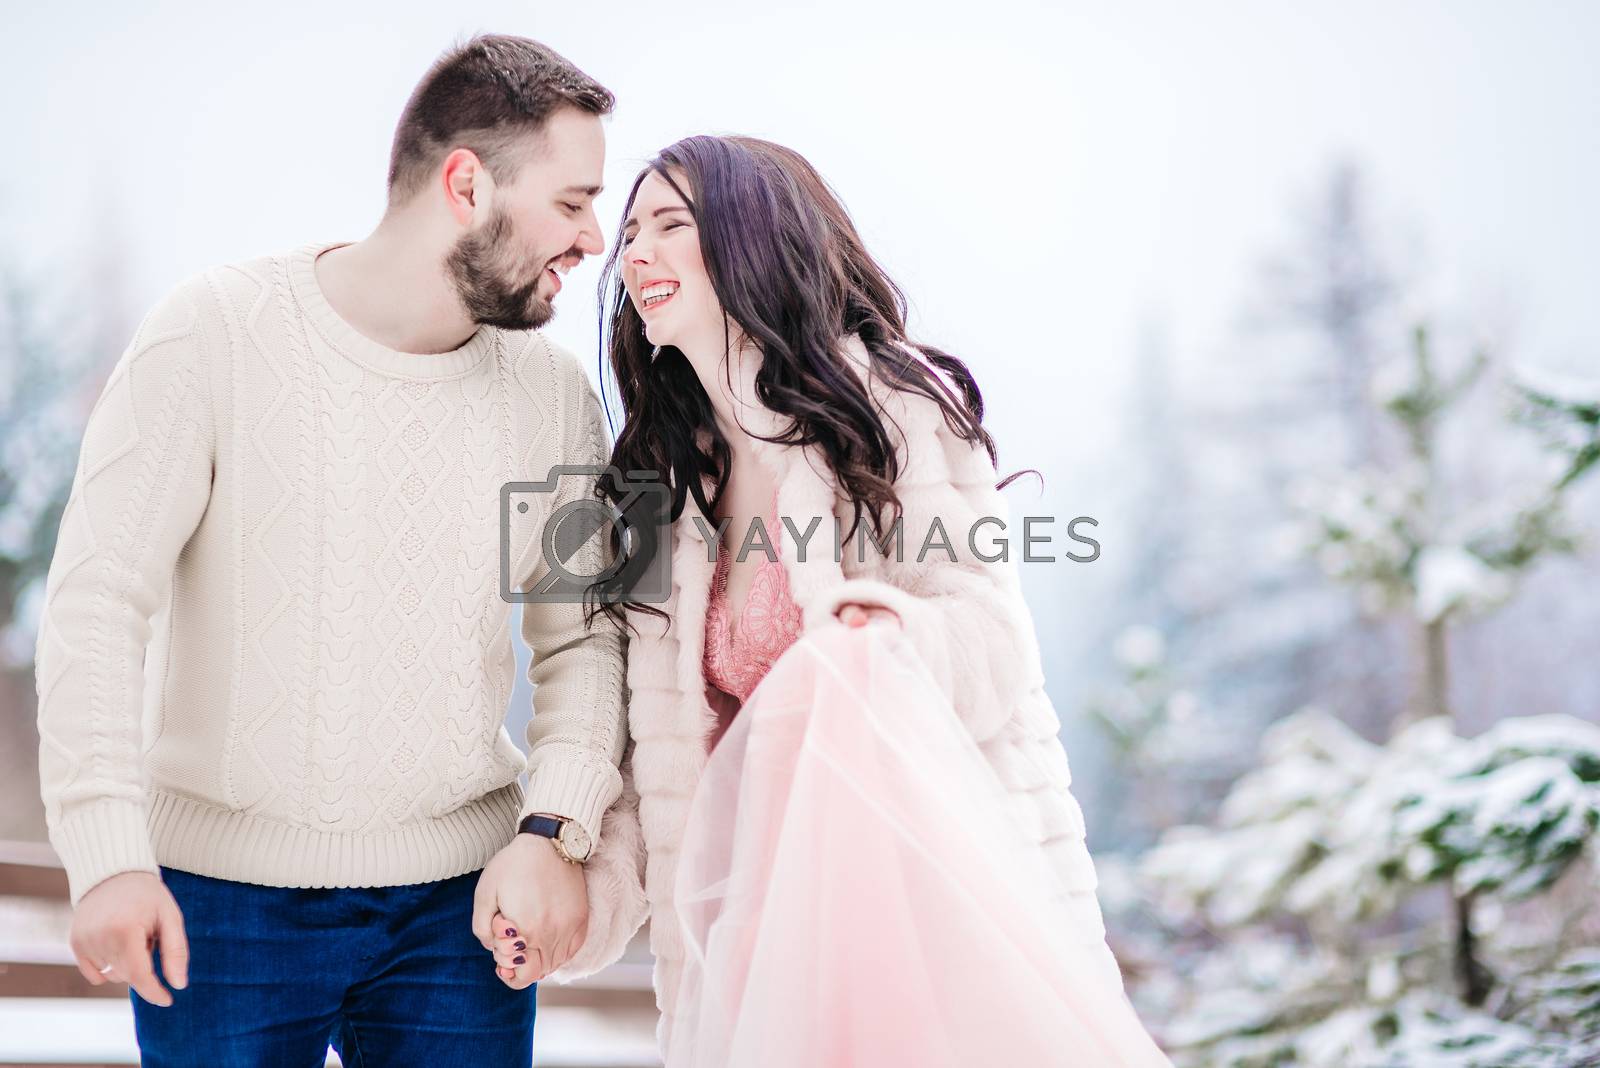 Royalty free image of young couple on a walk in the snowy mountains by Andreua